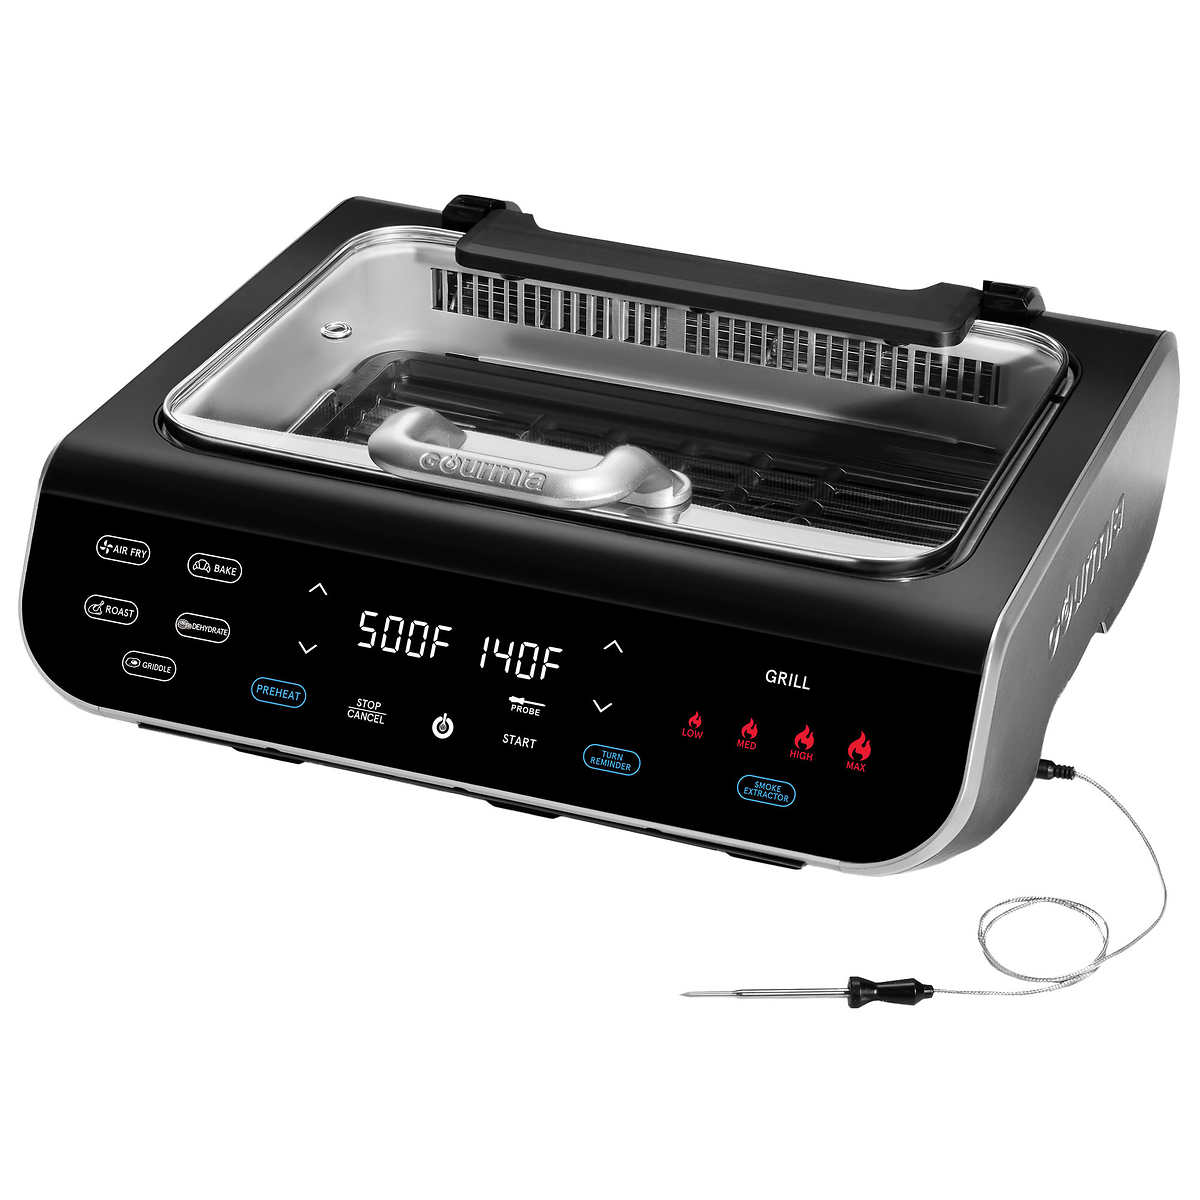 Costco: Gourmia FoodStation Smokeless Grill, Griddle, & Air Fryer with Integrated Temperature Probe $49.97